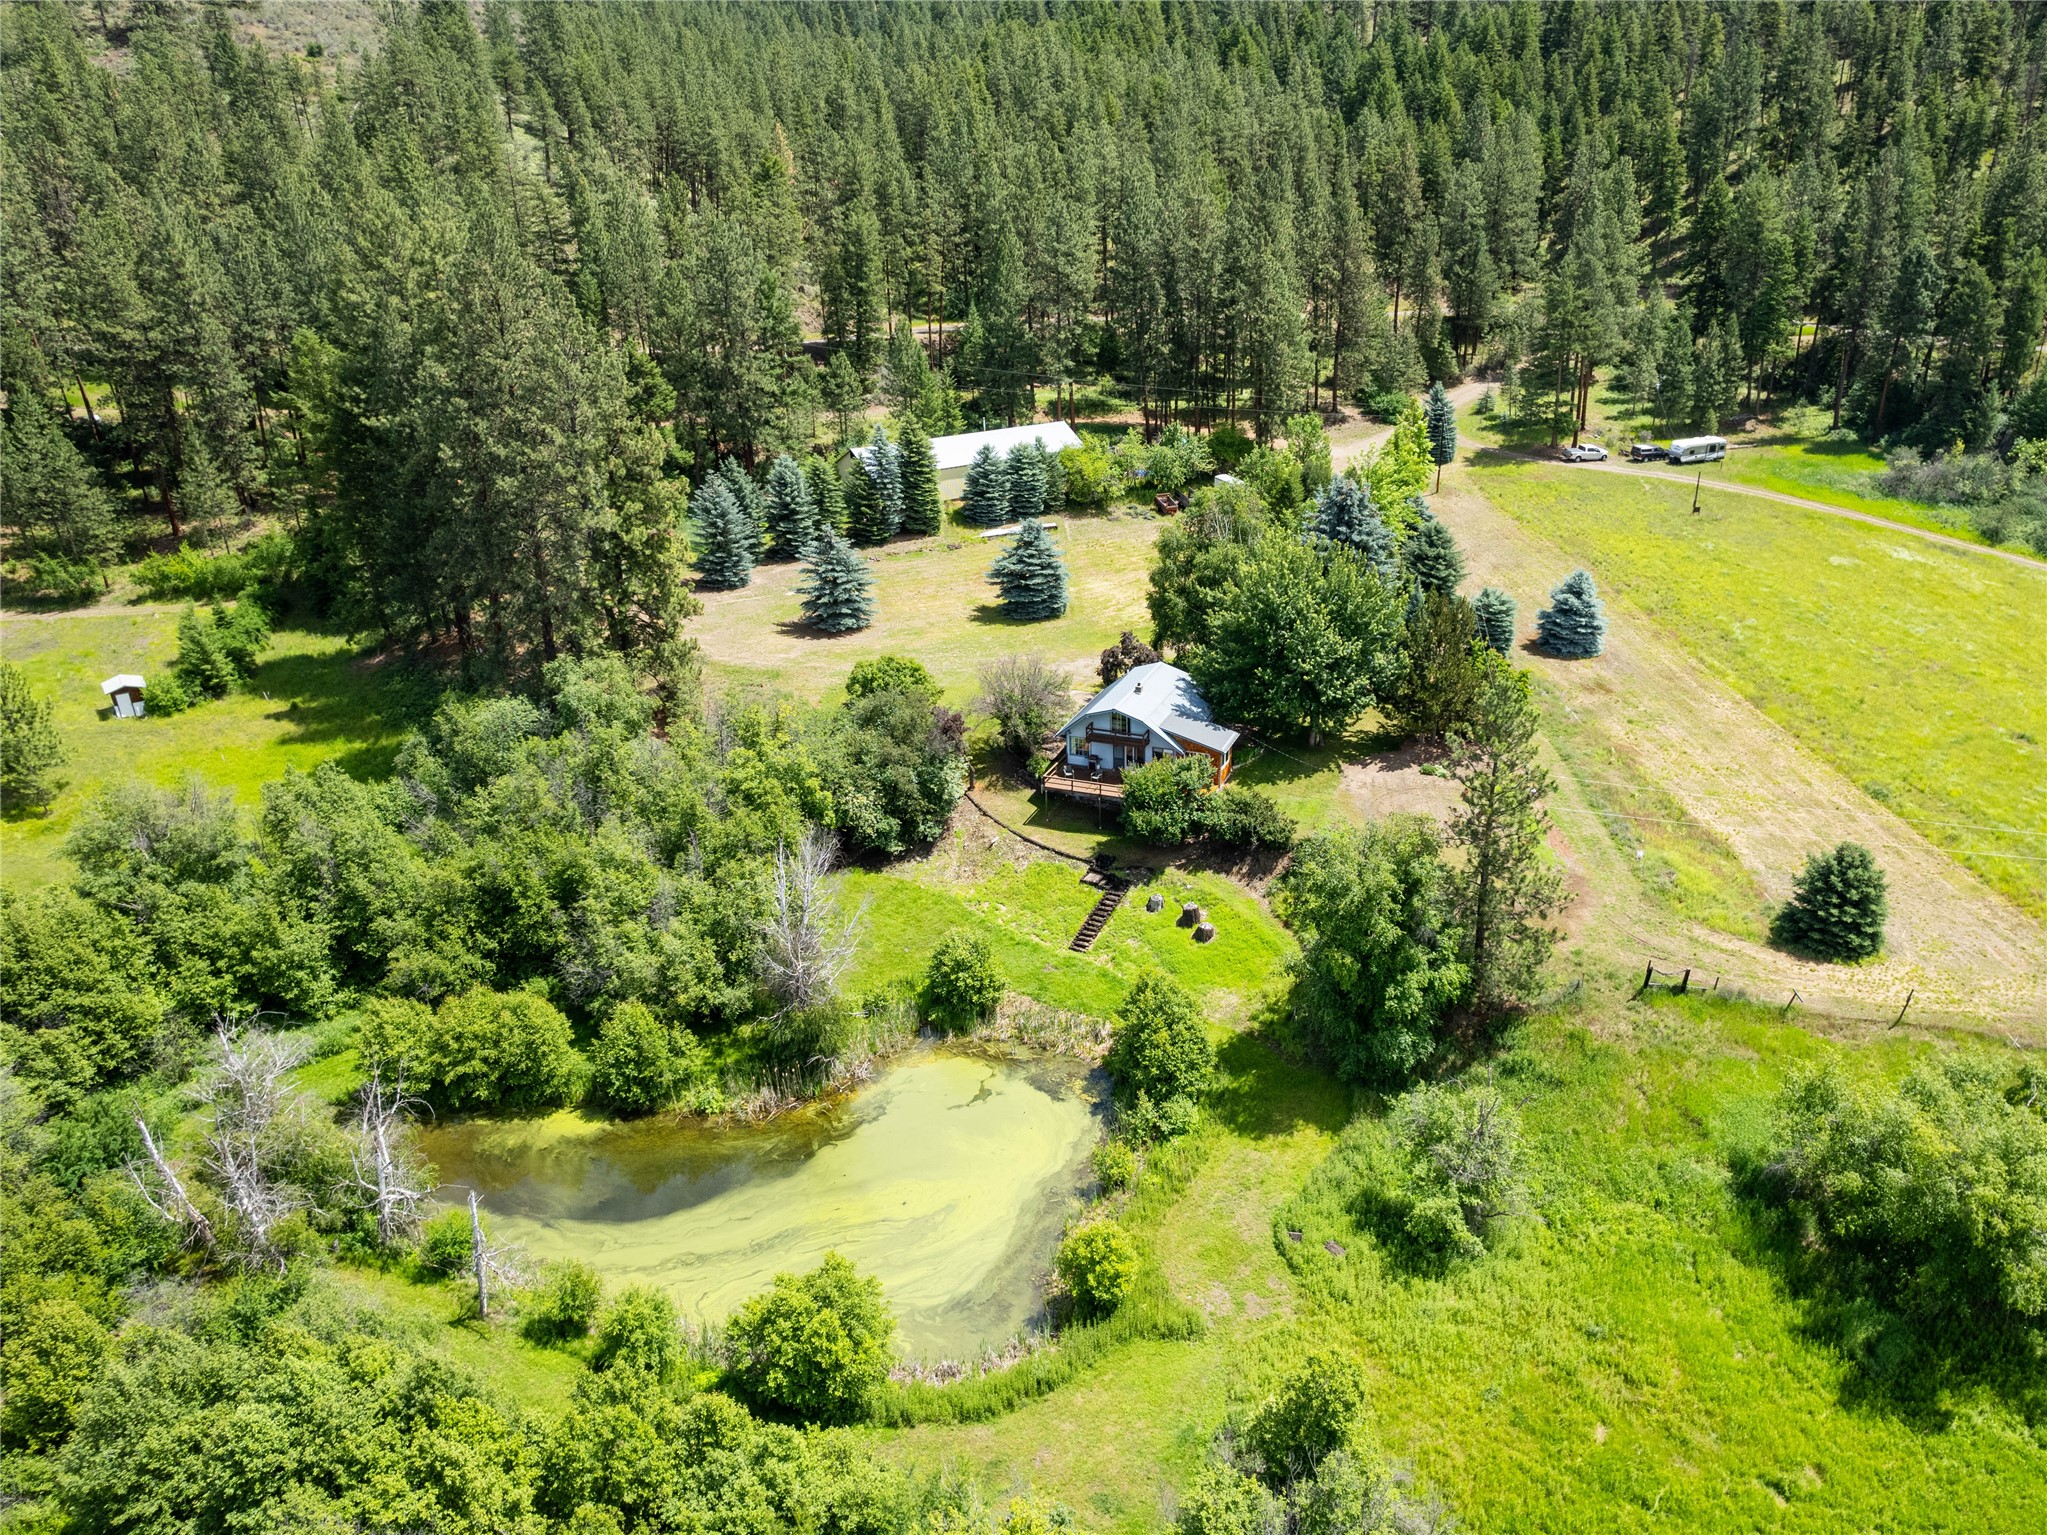 These captivating 22+ acre parcels offer a harmonious blend of natural beauty and the comforts of home. Situated in a picturesque location in Northwestern Montana, this property boasts a diverse landscape with forested areas, tillable meadows, two charming homes, multiple additional build sites and a large 30x90 ft. insulated and plumbed shop. The property abuts 560 acres of State Land that leads to 164,000+ acres of USFS! 
Adjacent to the parcels, an additional 30+ acres are available for lease coupled with a separate long-term purchase contract, providing an exceptional opportunity to create a larger estate.

As you explore the property, you'll be enchanted by the lush, marketable forested areas. Towering trees create a serene atmosphere, providing privacy and inviting you to wander along peaceful trails. Intermingled with the wooded sections open cultivatable meadows, pre-plumbed for irrigation, where sunlight cascades down onto the vibrant green grass. (See Supplemental Remarks) These expansive meadows present endless possibilities for outdoor activities, growing crops, pasture land, gardening, farming, raising animals or simply enjoying the panoramic views of the landscape.

Adding to the allure are two homes, totalling 3,033 square feet and 4 bedrooms and 3 bathrooms, each offering their own unique charm and functionality. The first exudes a cozy ambiance, with its comfortable living spaces, spiral staircase, and large windows, this home provides a perfect retreat for relaxation and tranquility. The second home is the perfect guest, extended family or income producing property. 

The contiguous 30-acre parcel seamlessly blends with the existing properties, sharing the same captivating natural features of forested and meadow lands, providing endless opportunities to develop into your own private estate or potentially subdivide, taking advantage of numerous building spots.

Whether you aspire to expand your living space, indulge in ambitious development projects, or simply relish the freedom and privacy of a larger estate, the option to purchase an additional 30 acres adjoining the original 22-acre parcel presents an extraordinary chance to shape your own idyllic sanctuary in perfect harmony with nature.